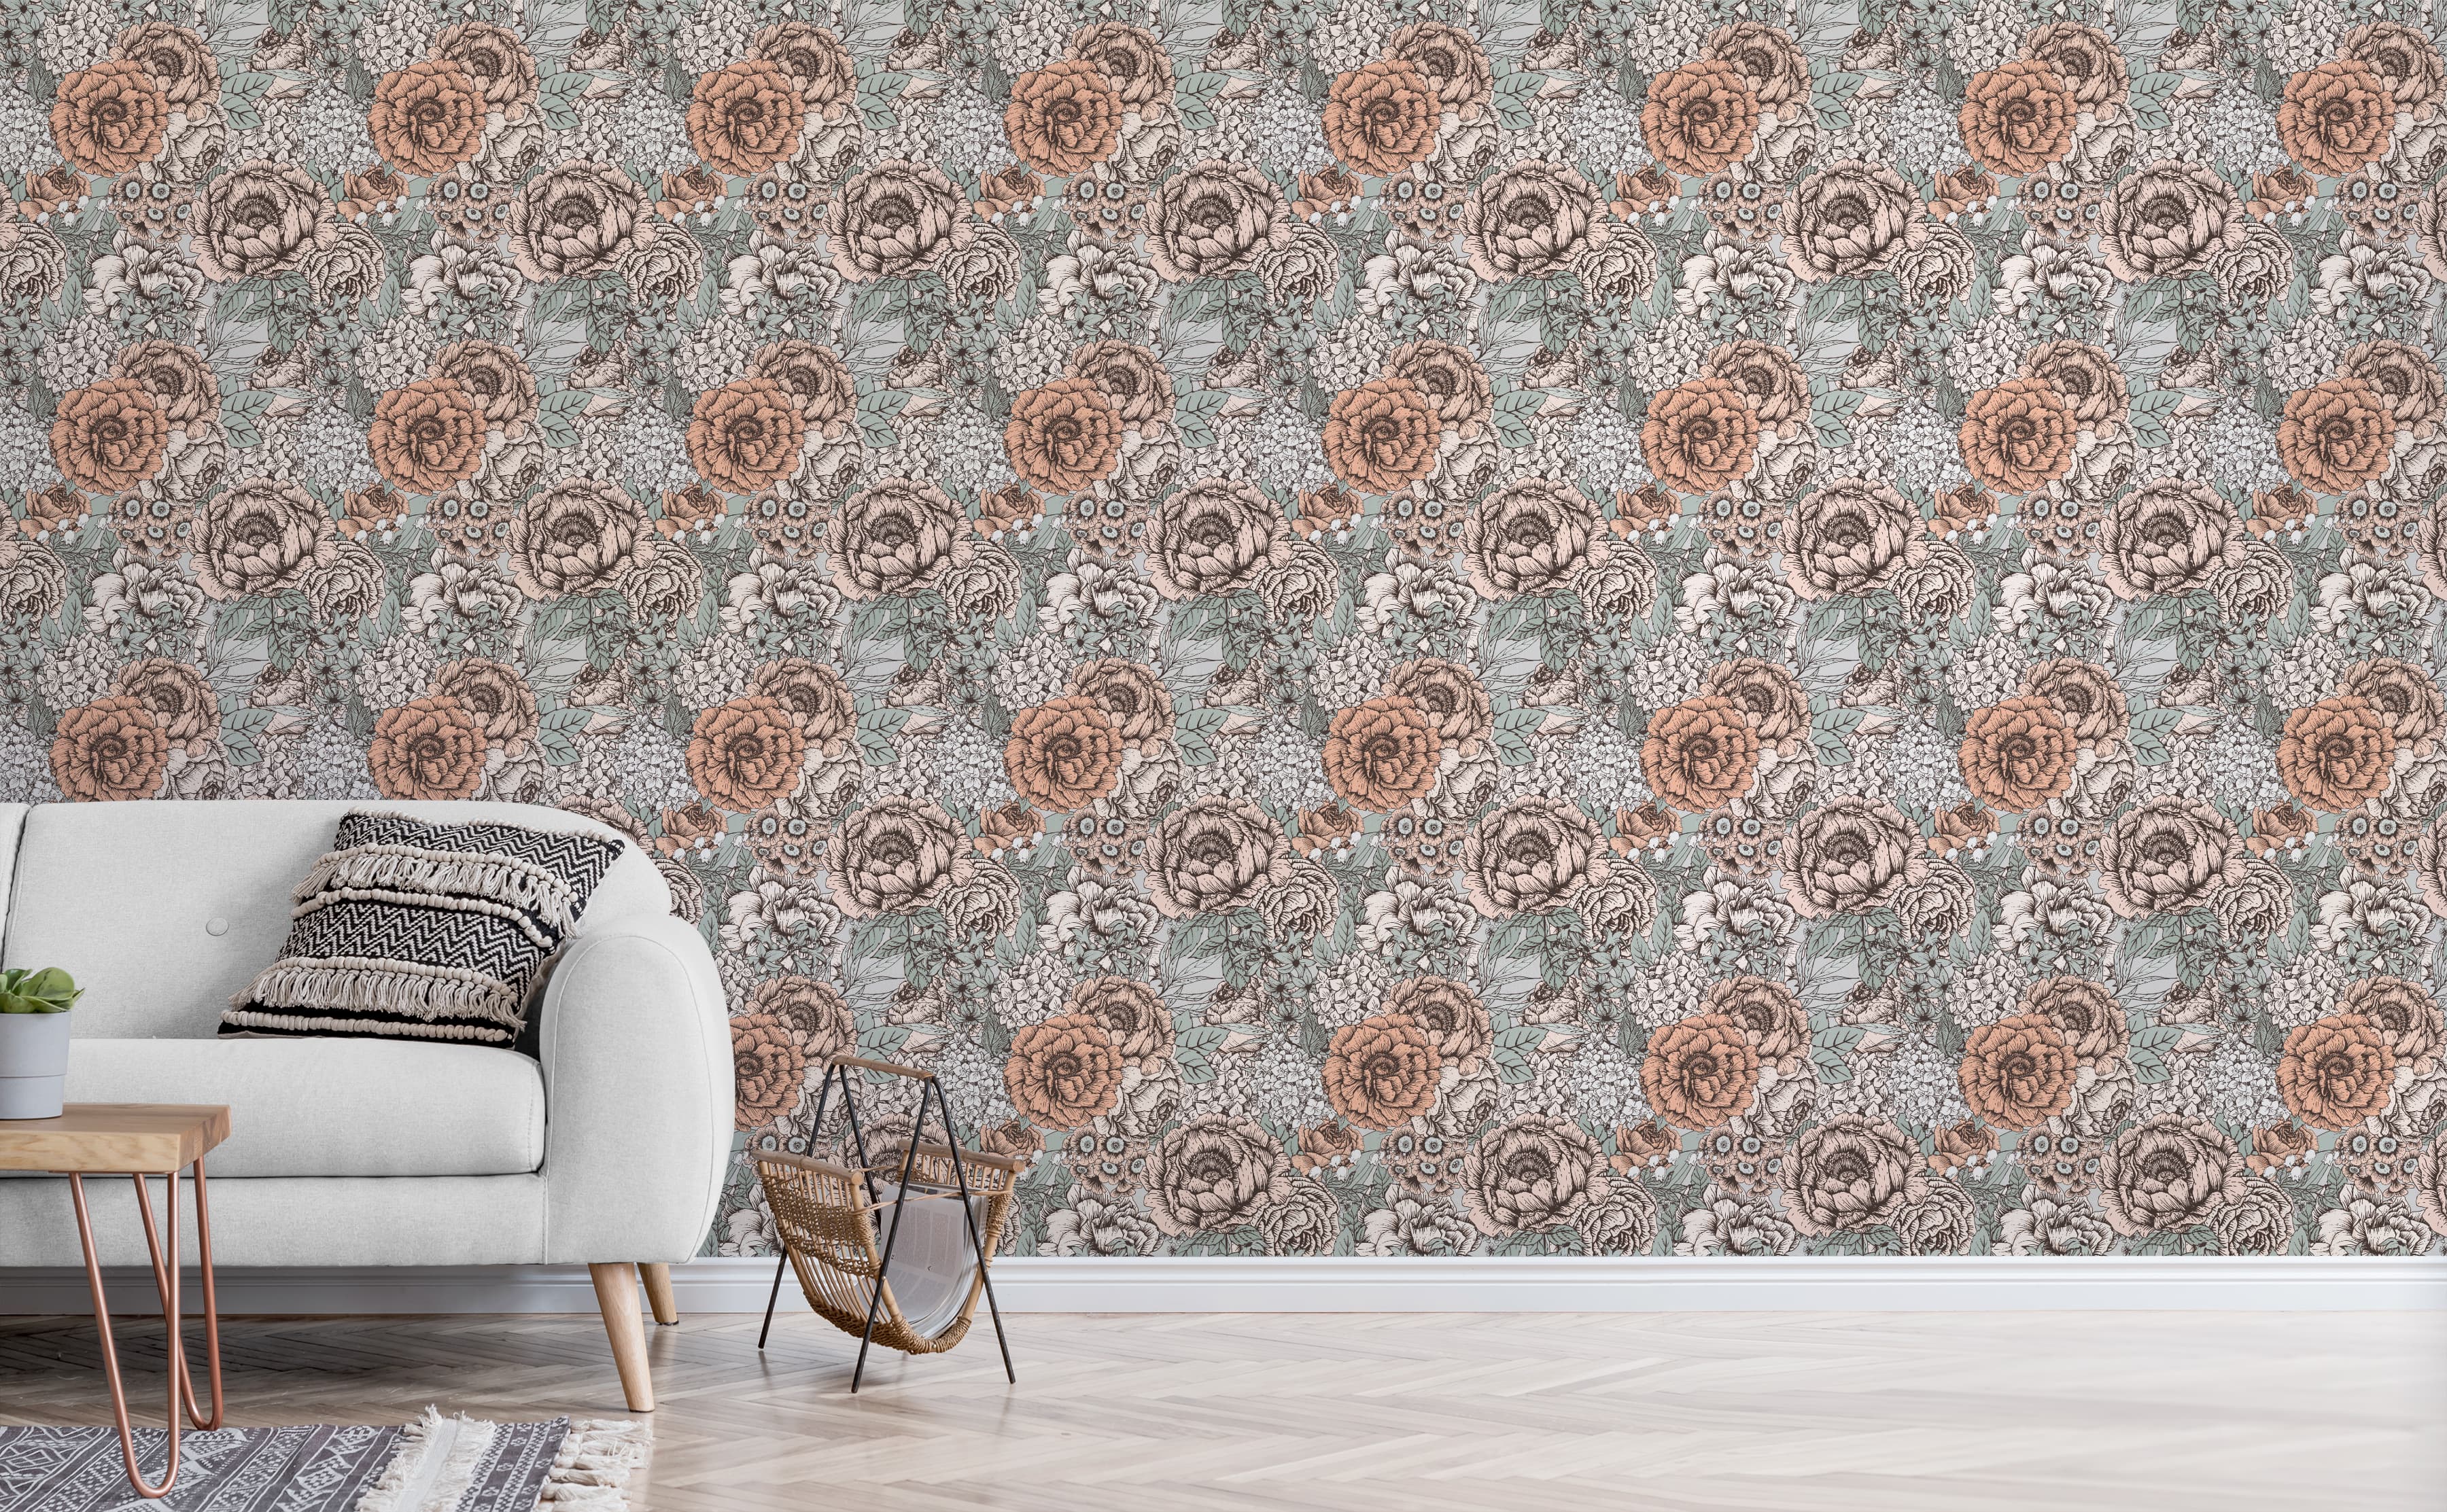 Floral Pattern Wallpaper For Walls Muted Floral Wallsneedlove Images, Photos, Reviews